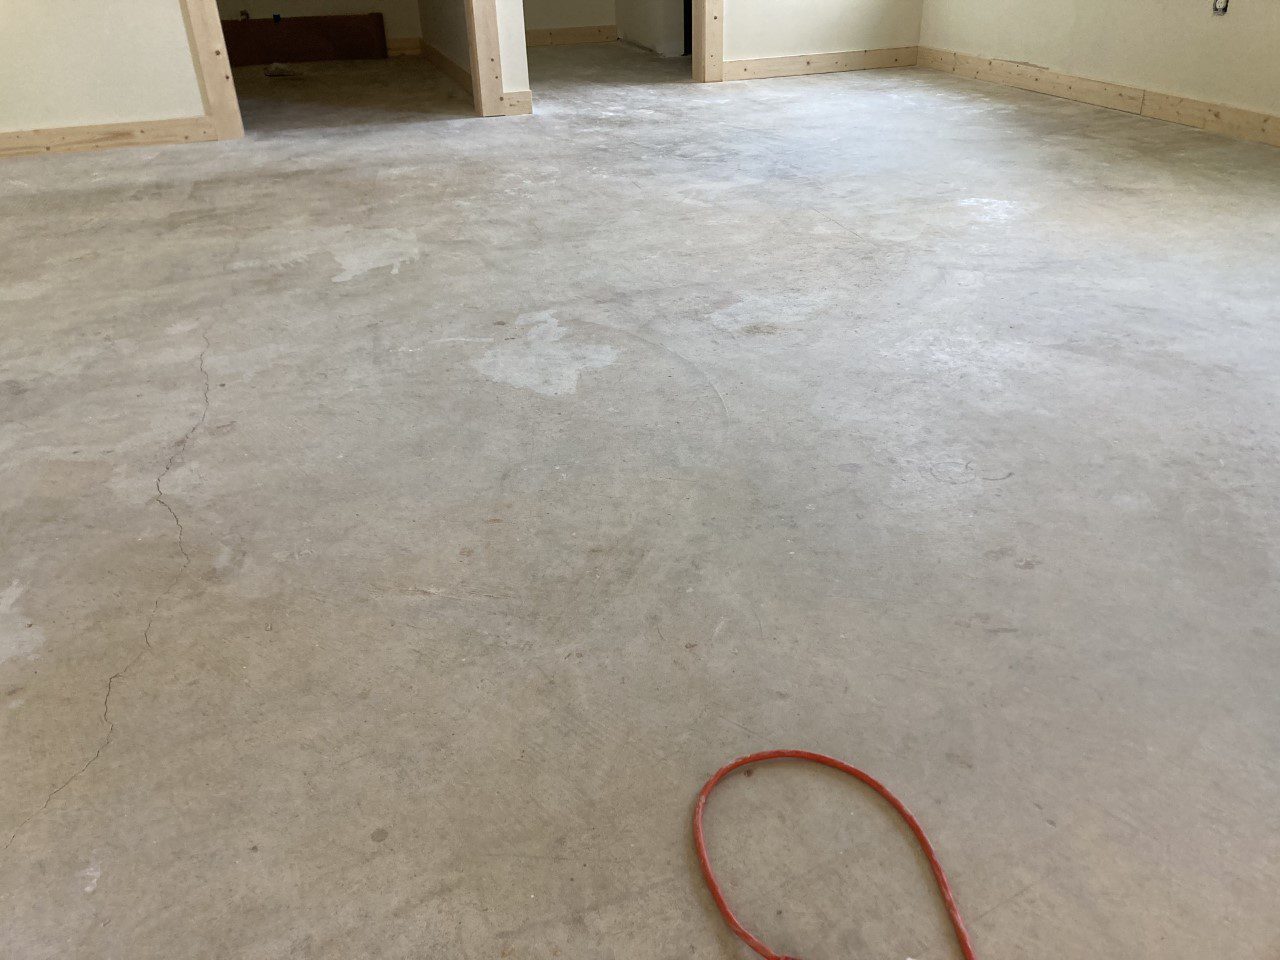 Cleaned and mopped concrete floor